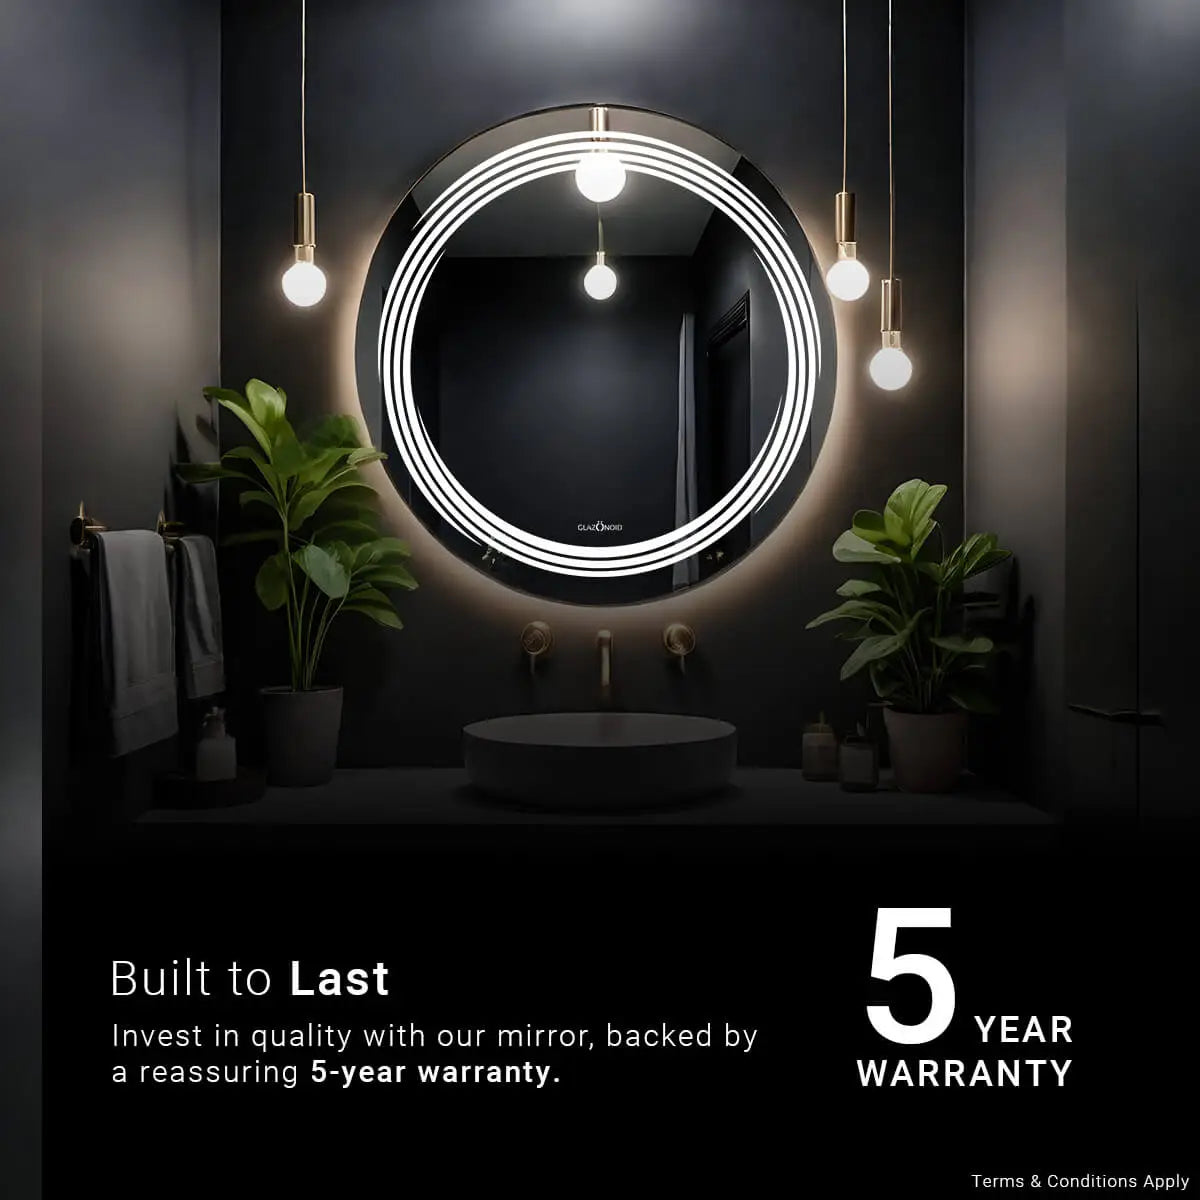 Mystical Round Wall Mirror With Lights | 5-Year Warranty, Premium Quality, Customizable LED Lighting